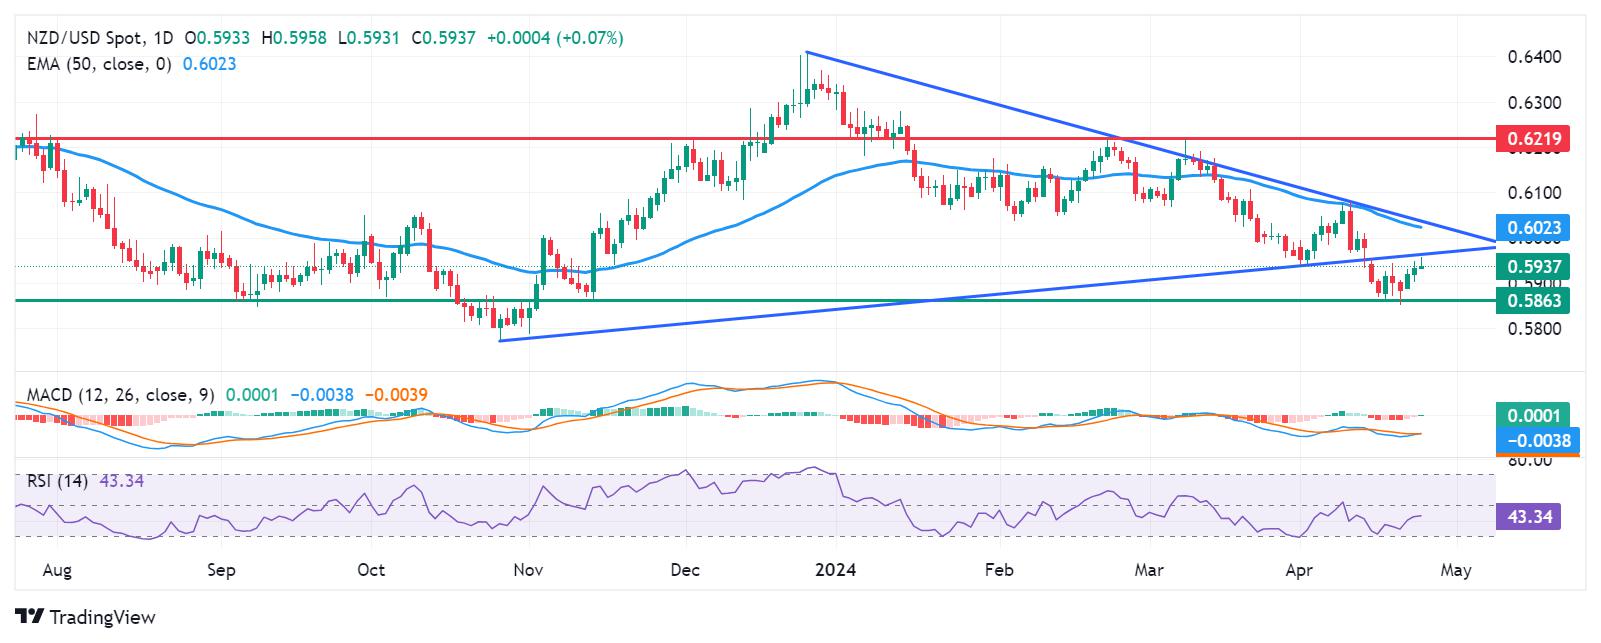 NZD/USD Price Analysis: Could break into the symmetrical triangle, rises to near 0.5950